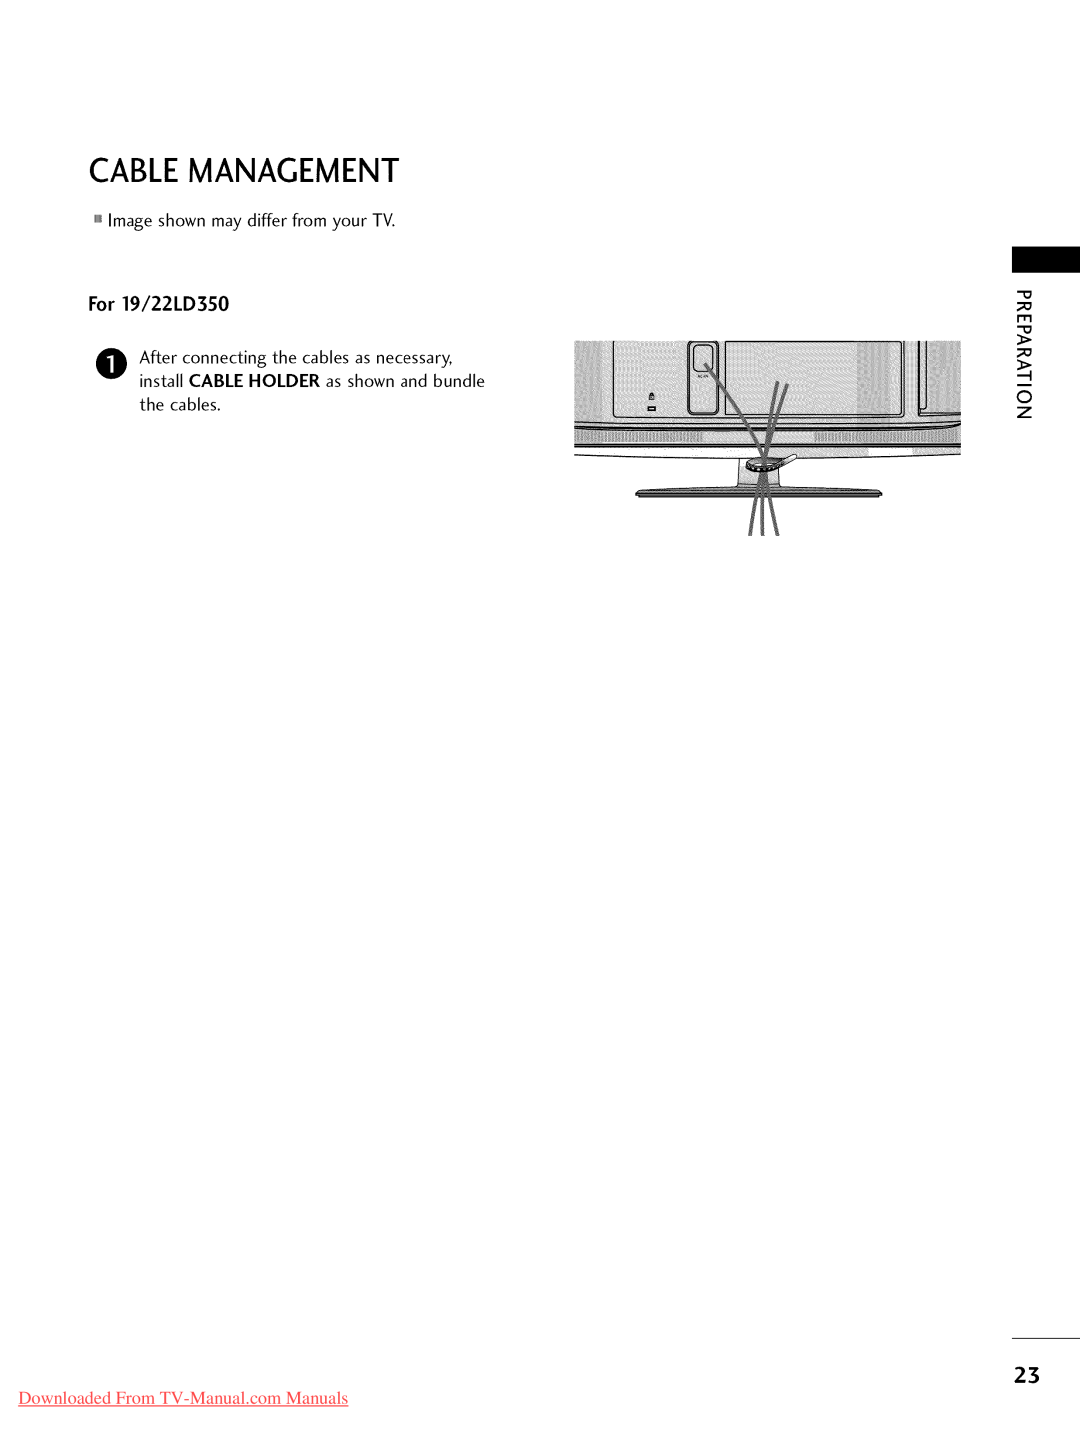 LG Electronics 42LD450, 32LD350, 47LD450, 47LD520 Cablemanagement, Downloaded From TV-Manual.com Manuals, For 19/22LD350 